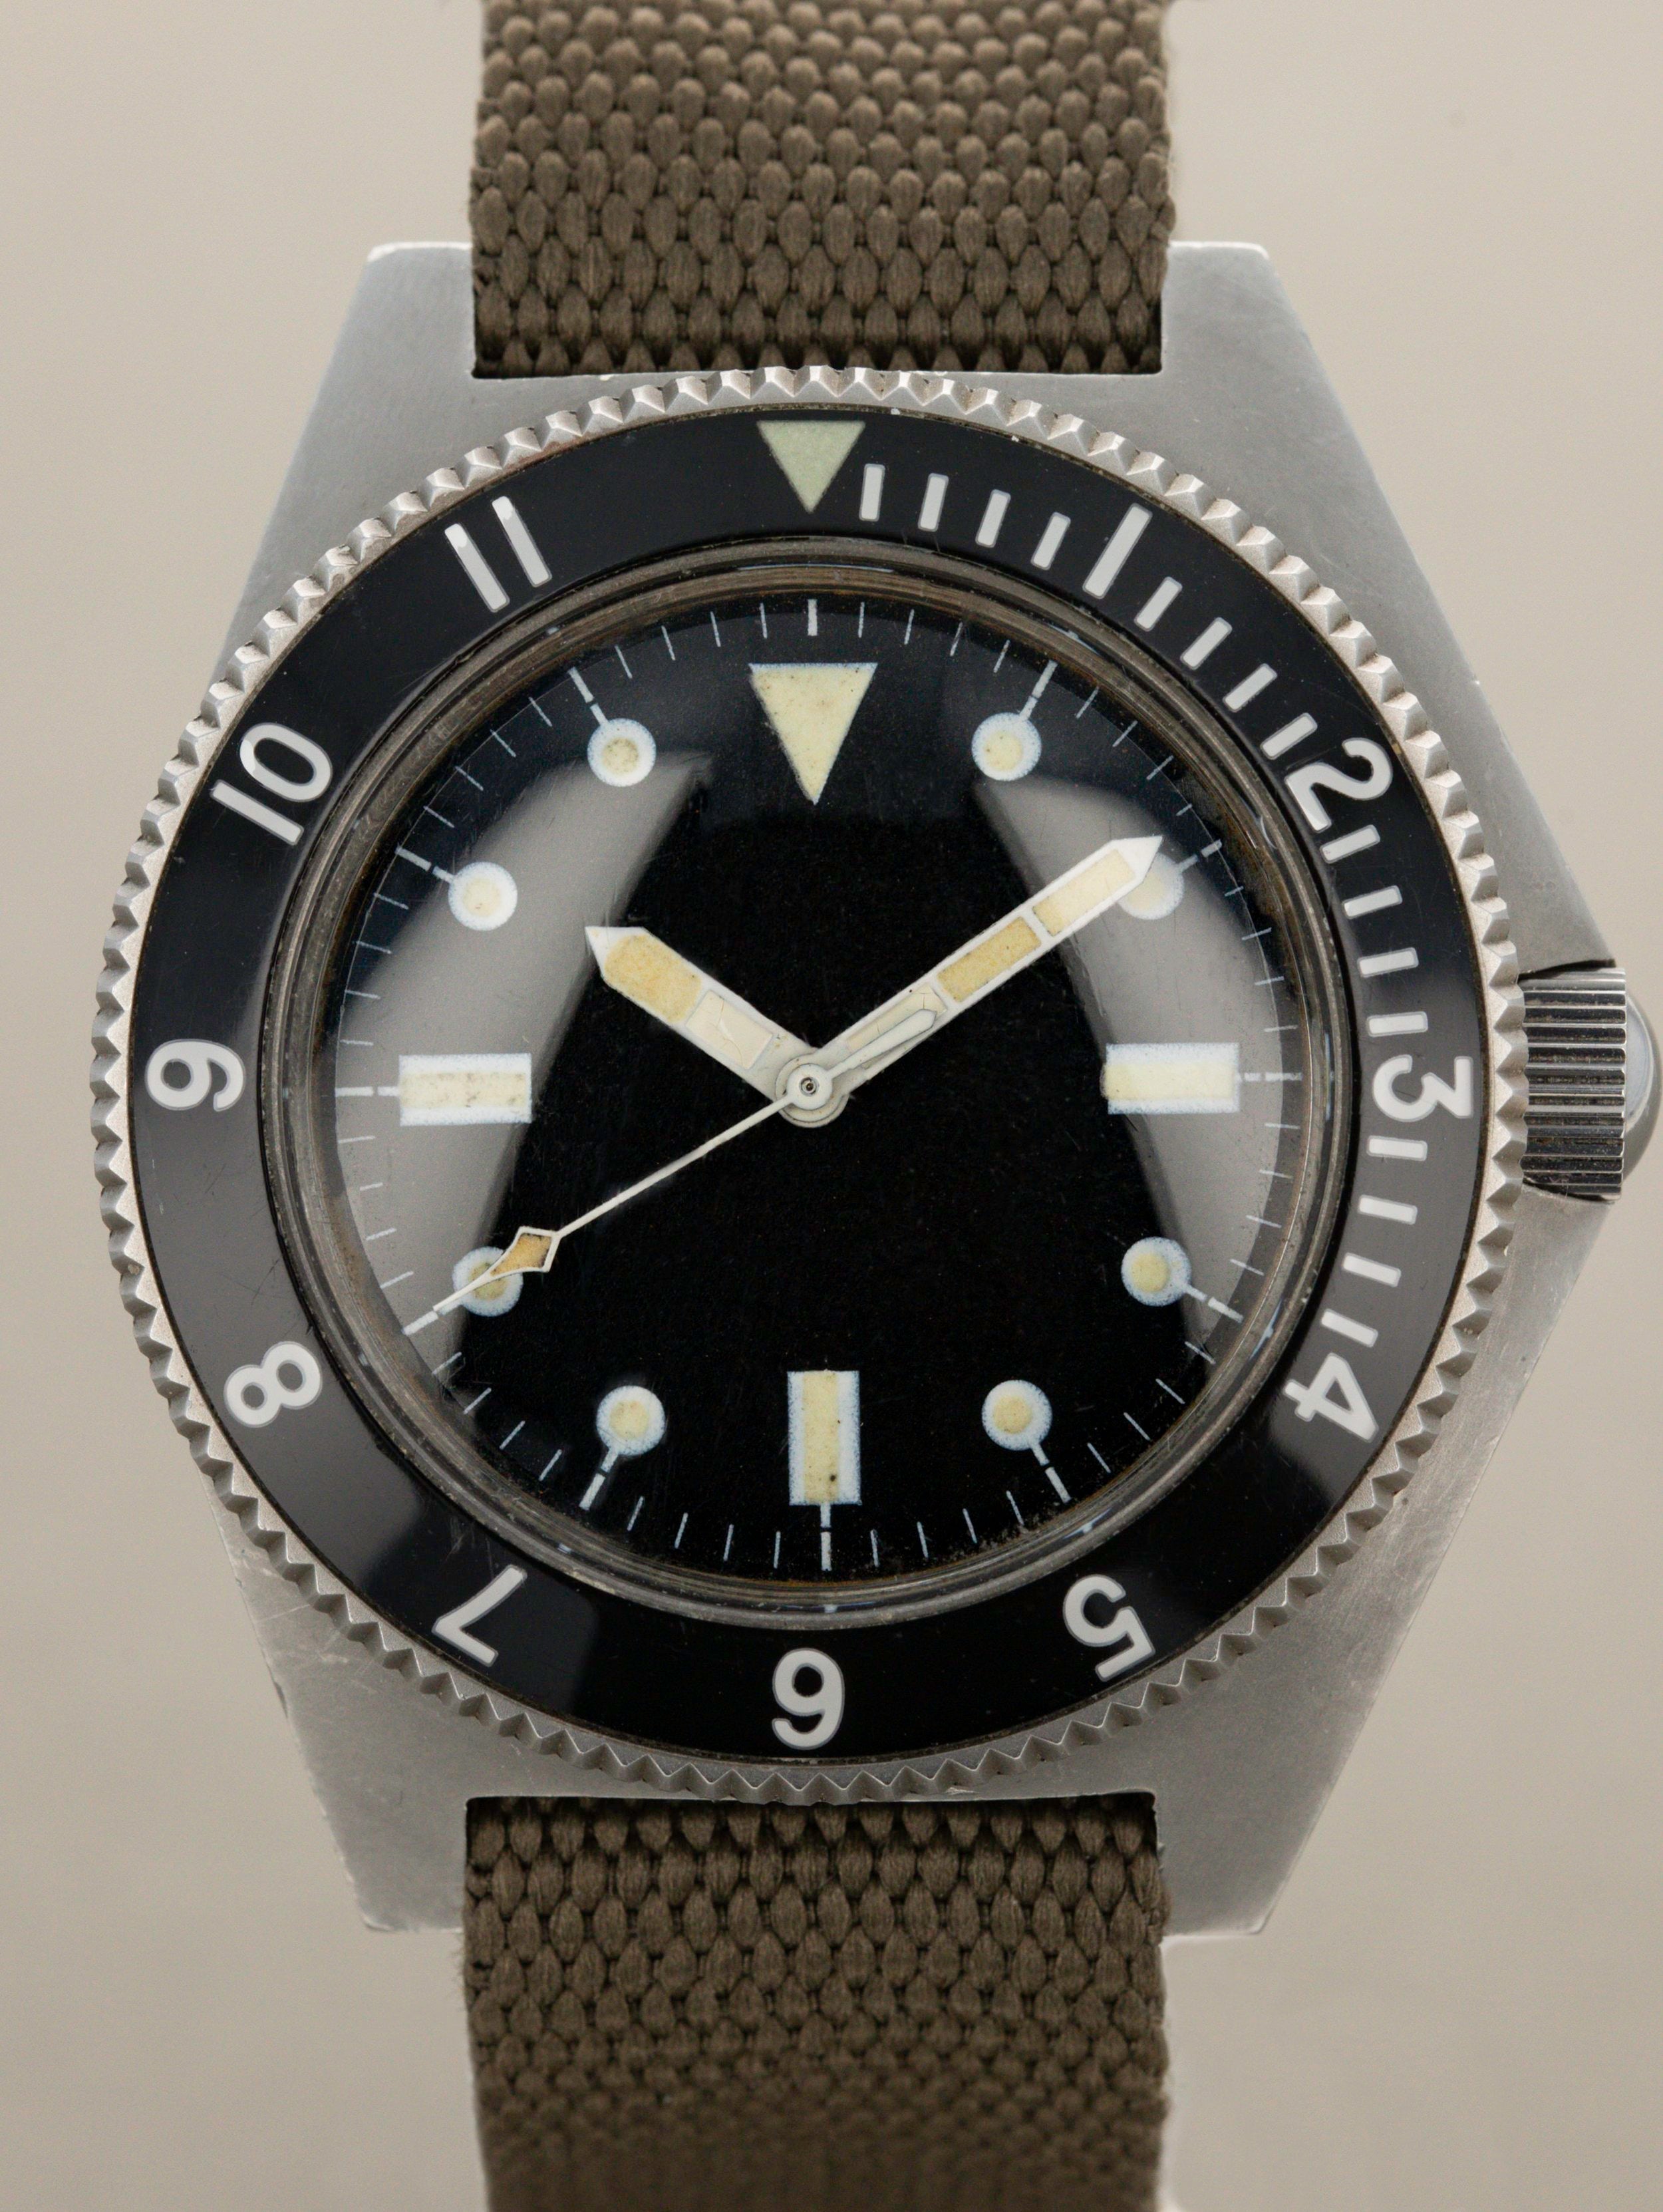 Benrus Type I - Military Issued Sterile Dial